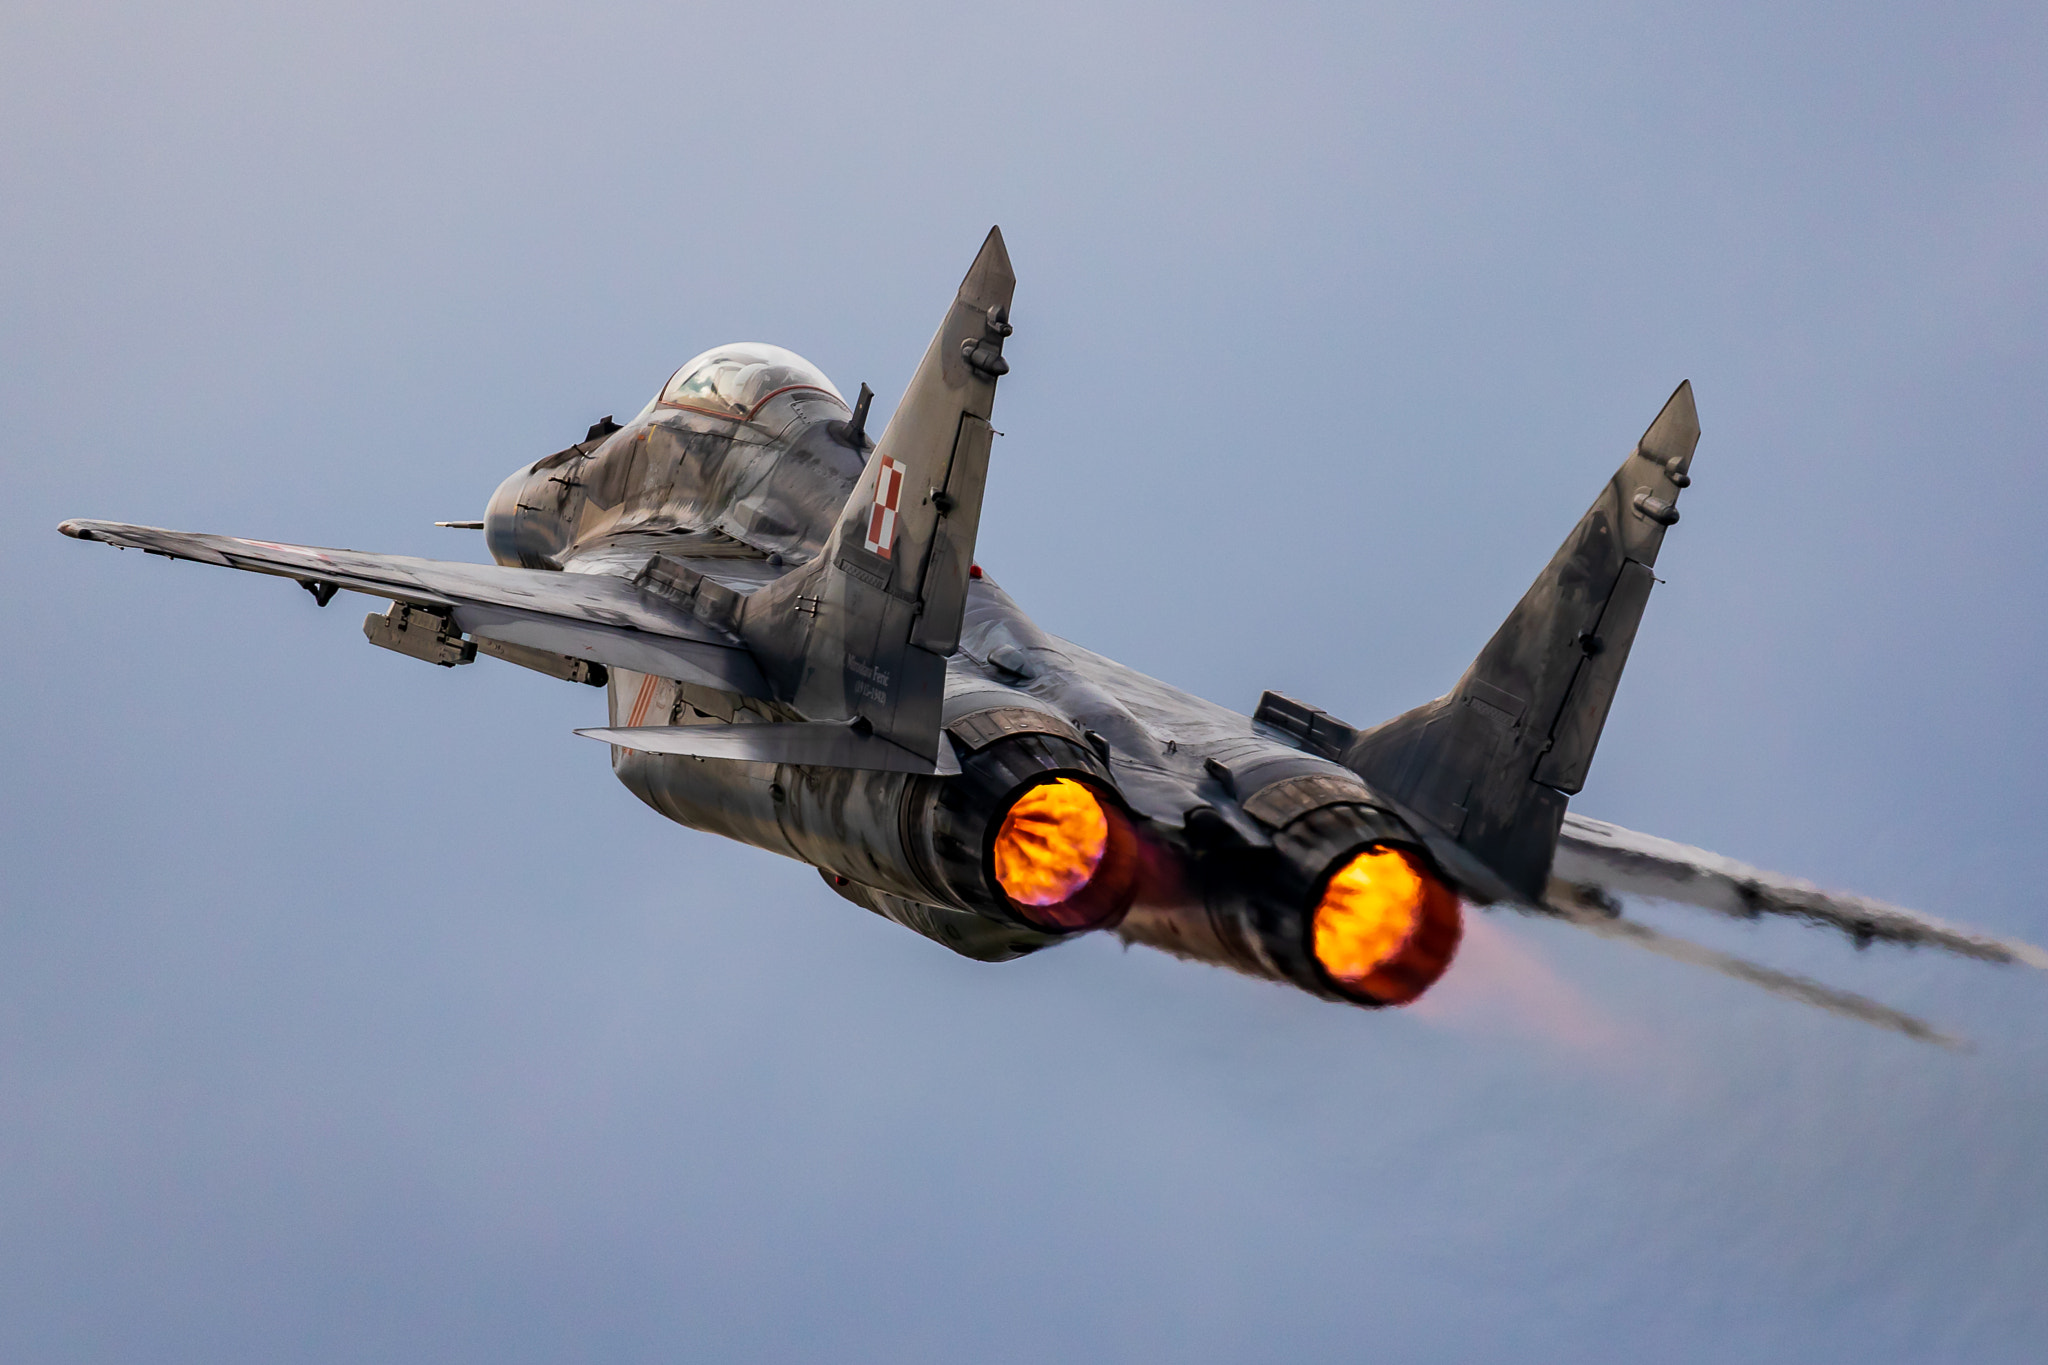 General 2048x1365 500px afterburner jet engine aircraft military airshows aerial view military aircraft Polish Air Force rear view Mikoyan-Gurevich vehicle sky Russian/Soviet aircraft flying military vehicle Mikoyan MiG-29